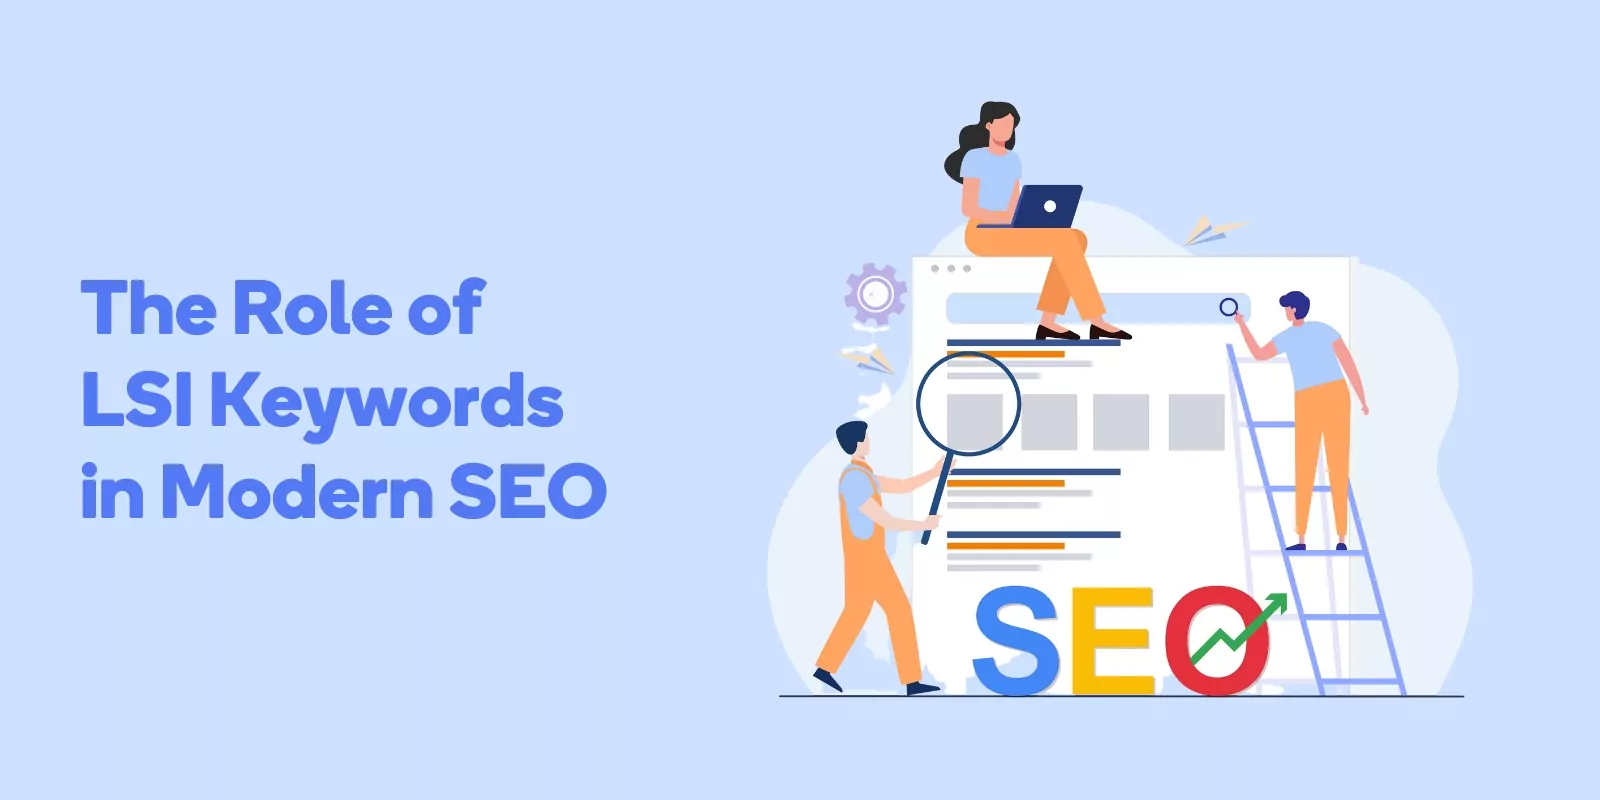 The Role of LSI Keywords in Modern SEO